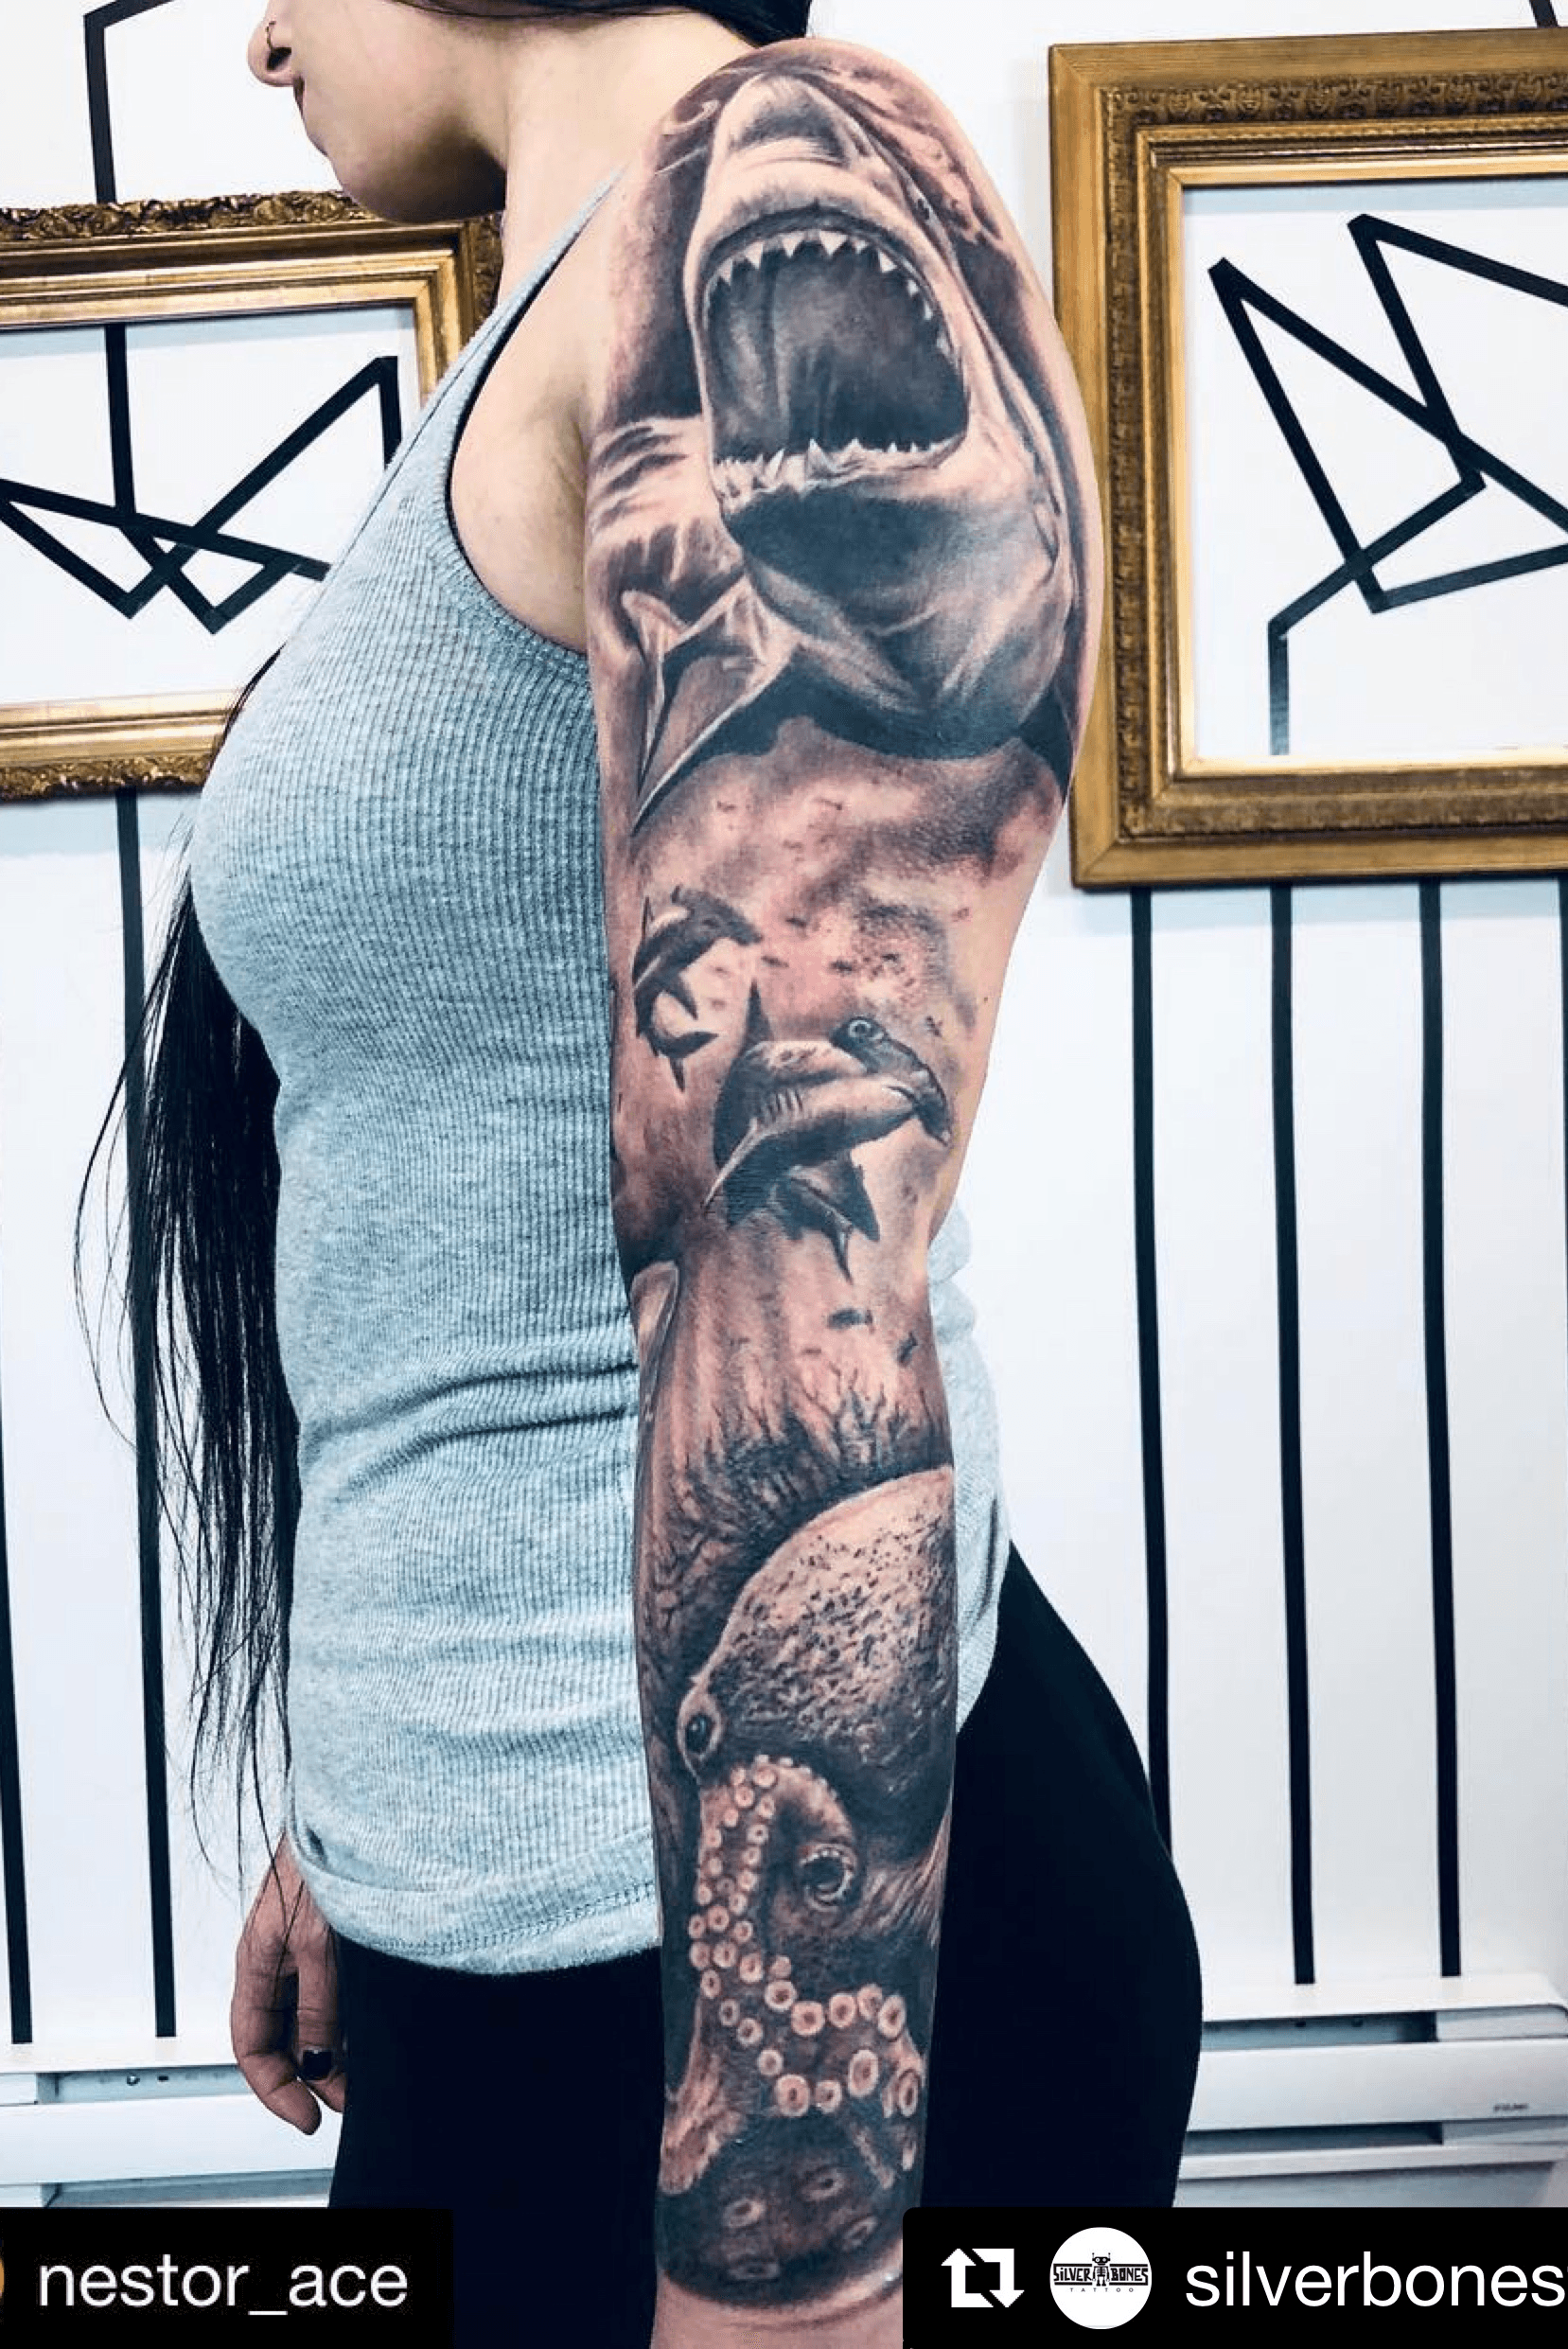 Tattoo uploaded by Alo Loco Tattoo  Surf  Dive Full Sleeve finished  Black and grey realistic full sleeve tattoo of sea life deep diver shark  hammer fish nemo fish and jelly